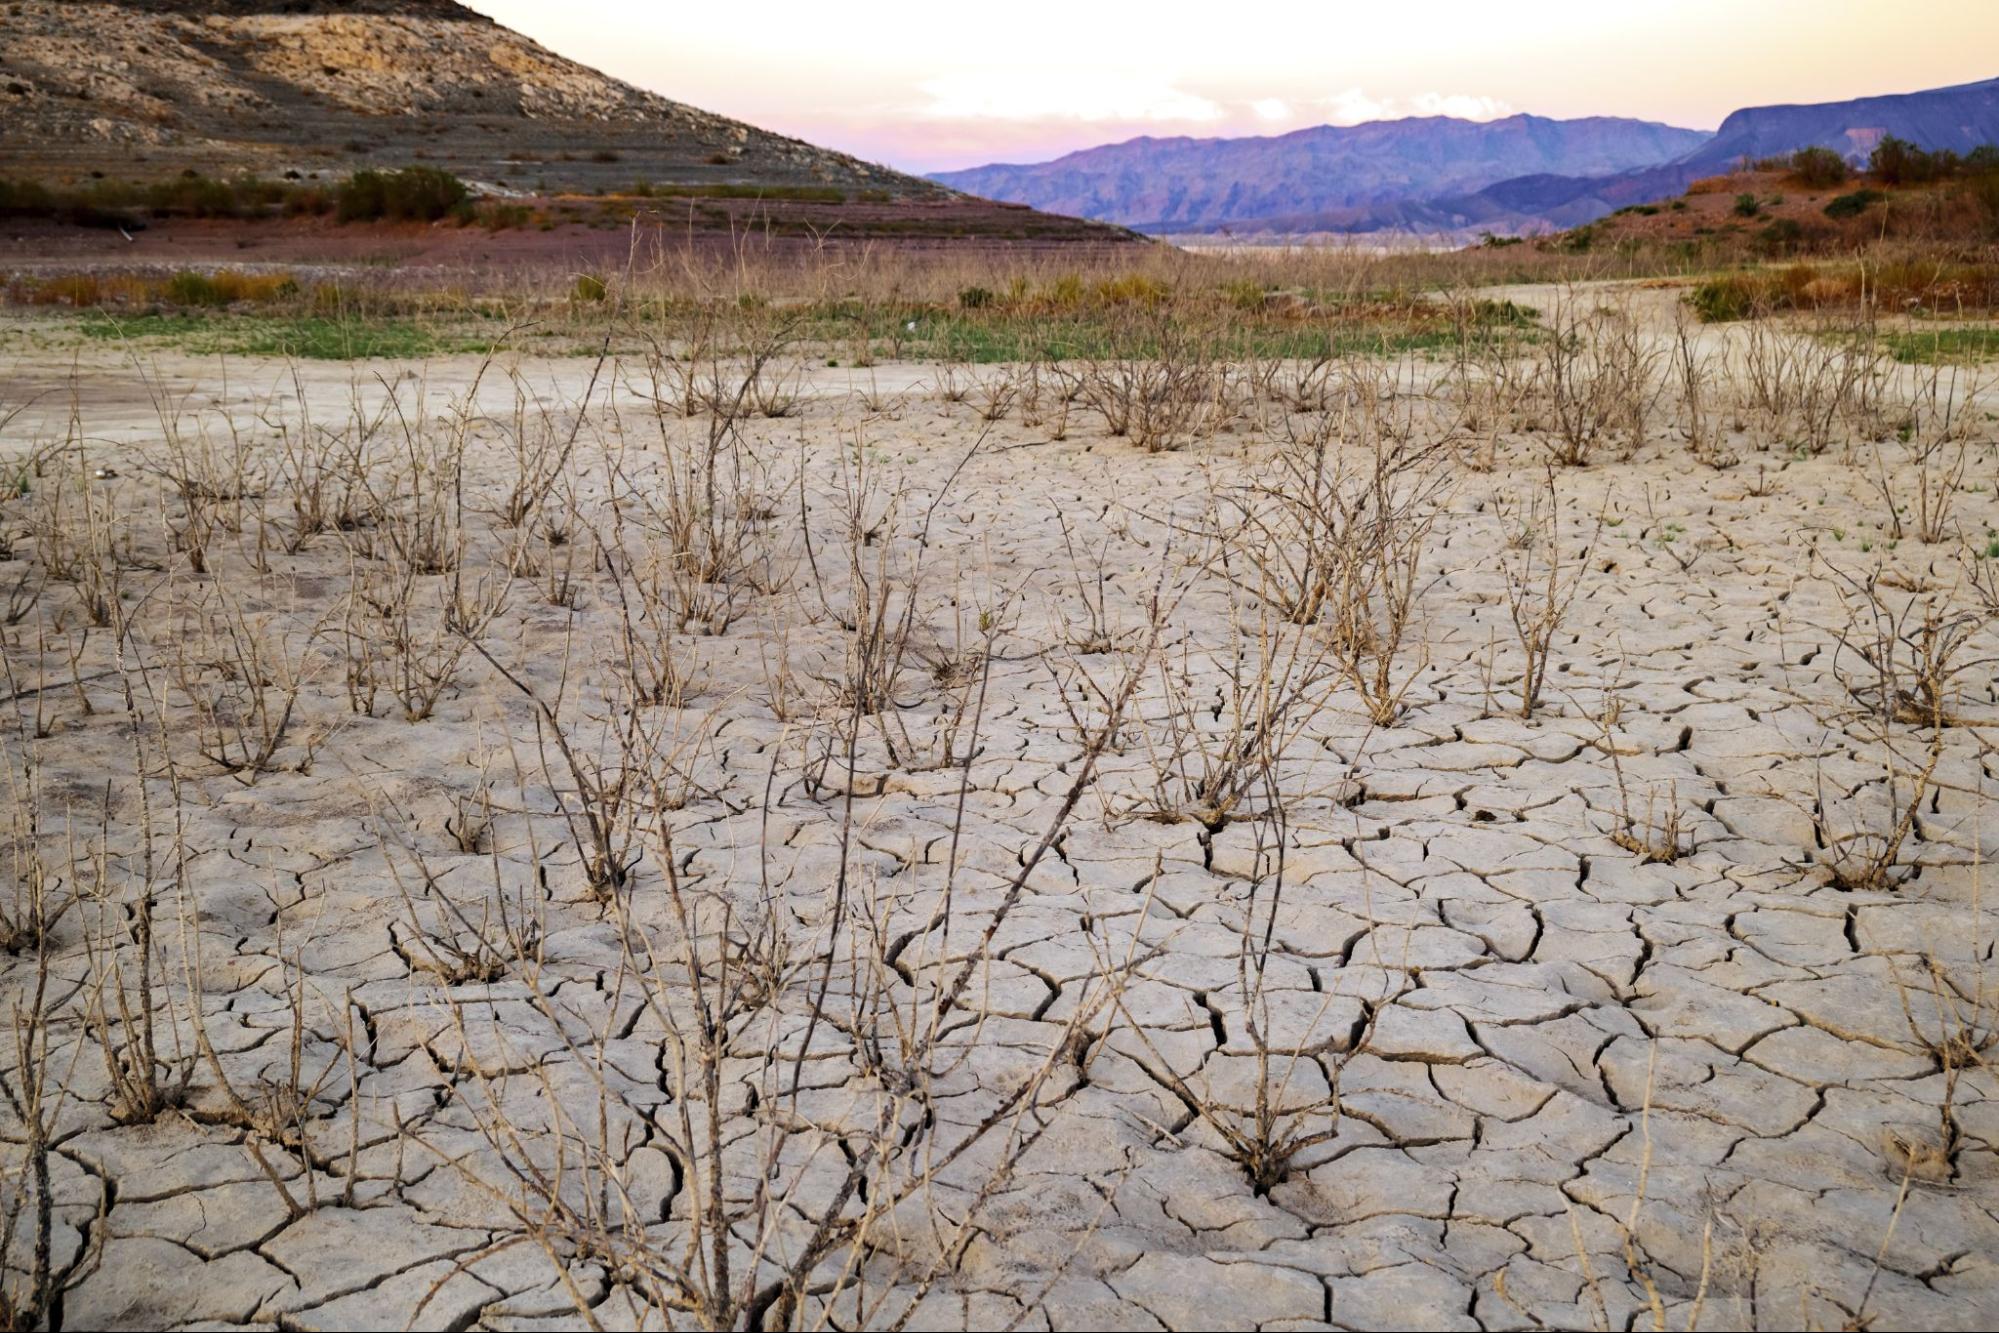 drying lake mead in nevada during the drought